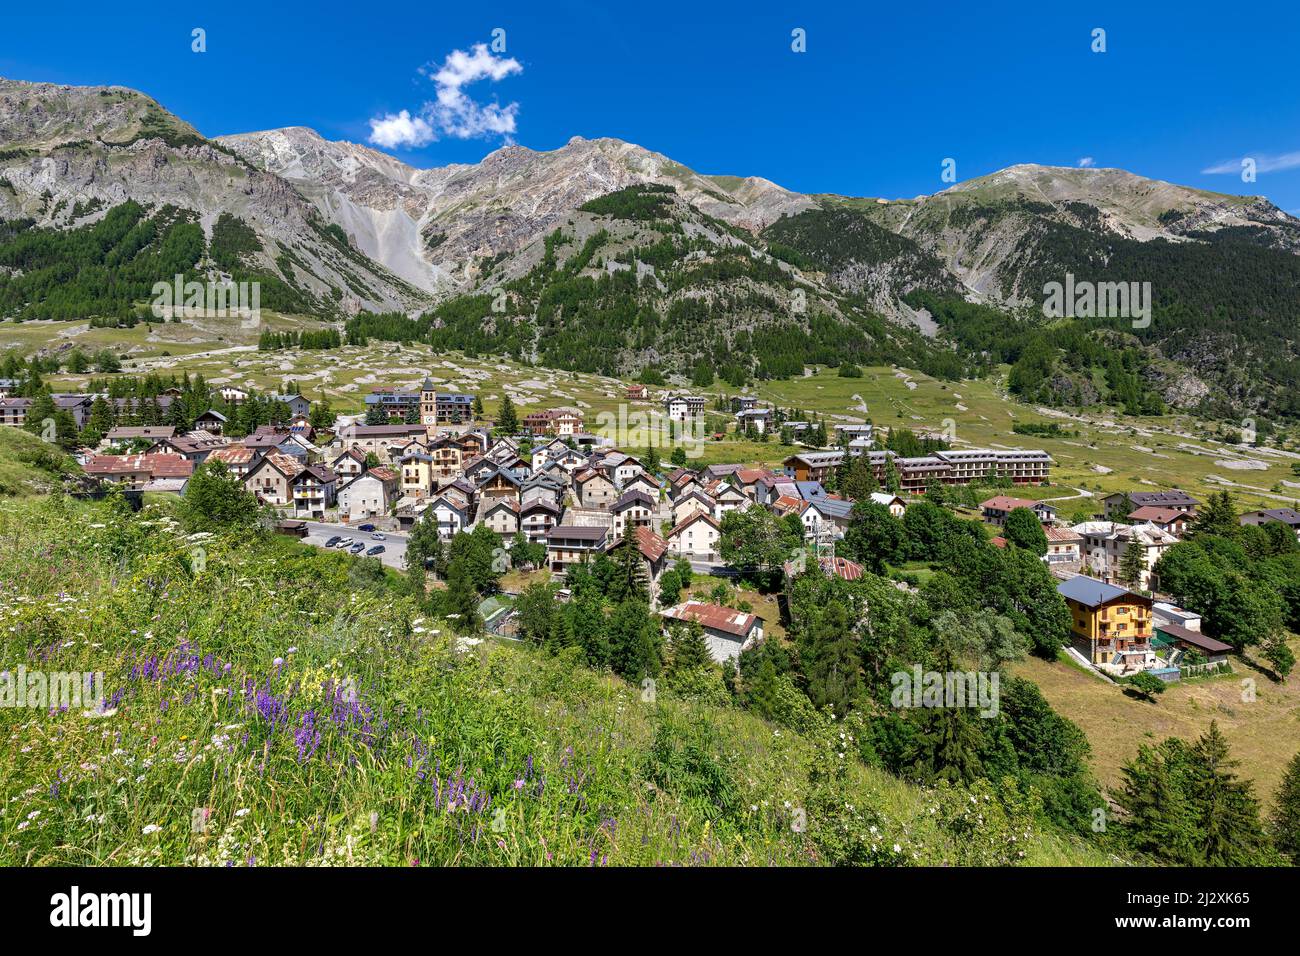 Small alpine town of Bersezio on the green valley among mountains under blue sky in Piedmont, Northern Italy. Stock Photo